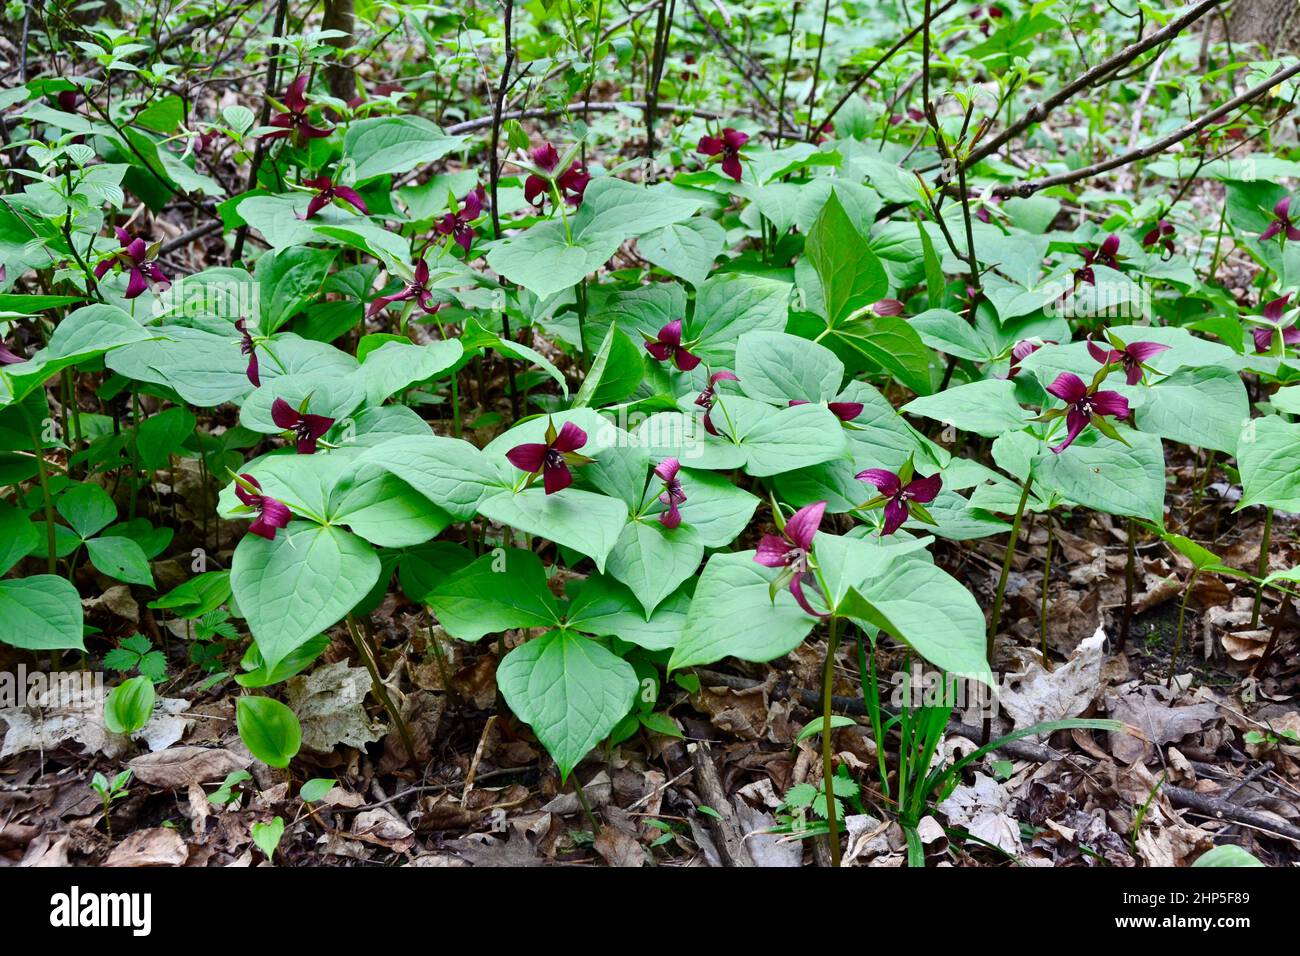 Large group of red trillium flowers blooming in woods during Spring Stock Photo